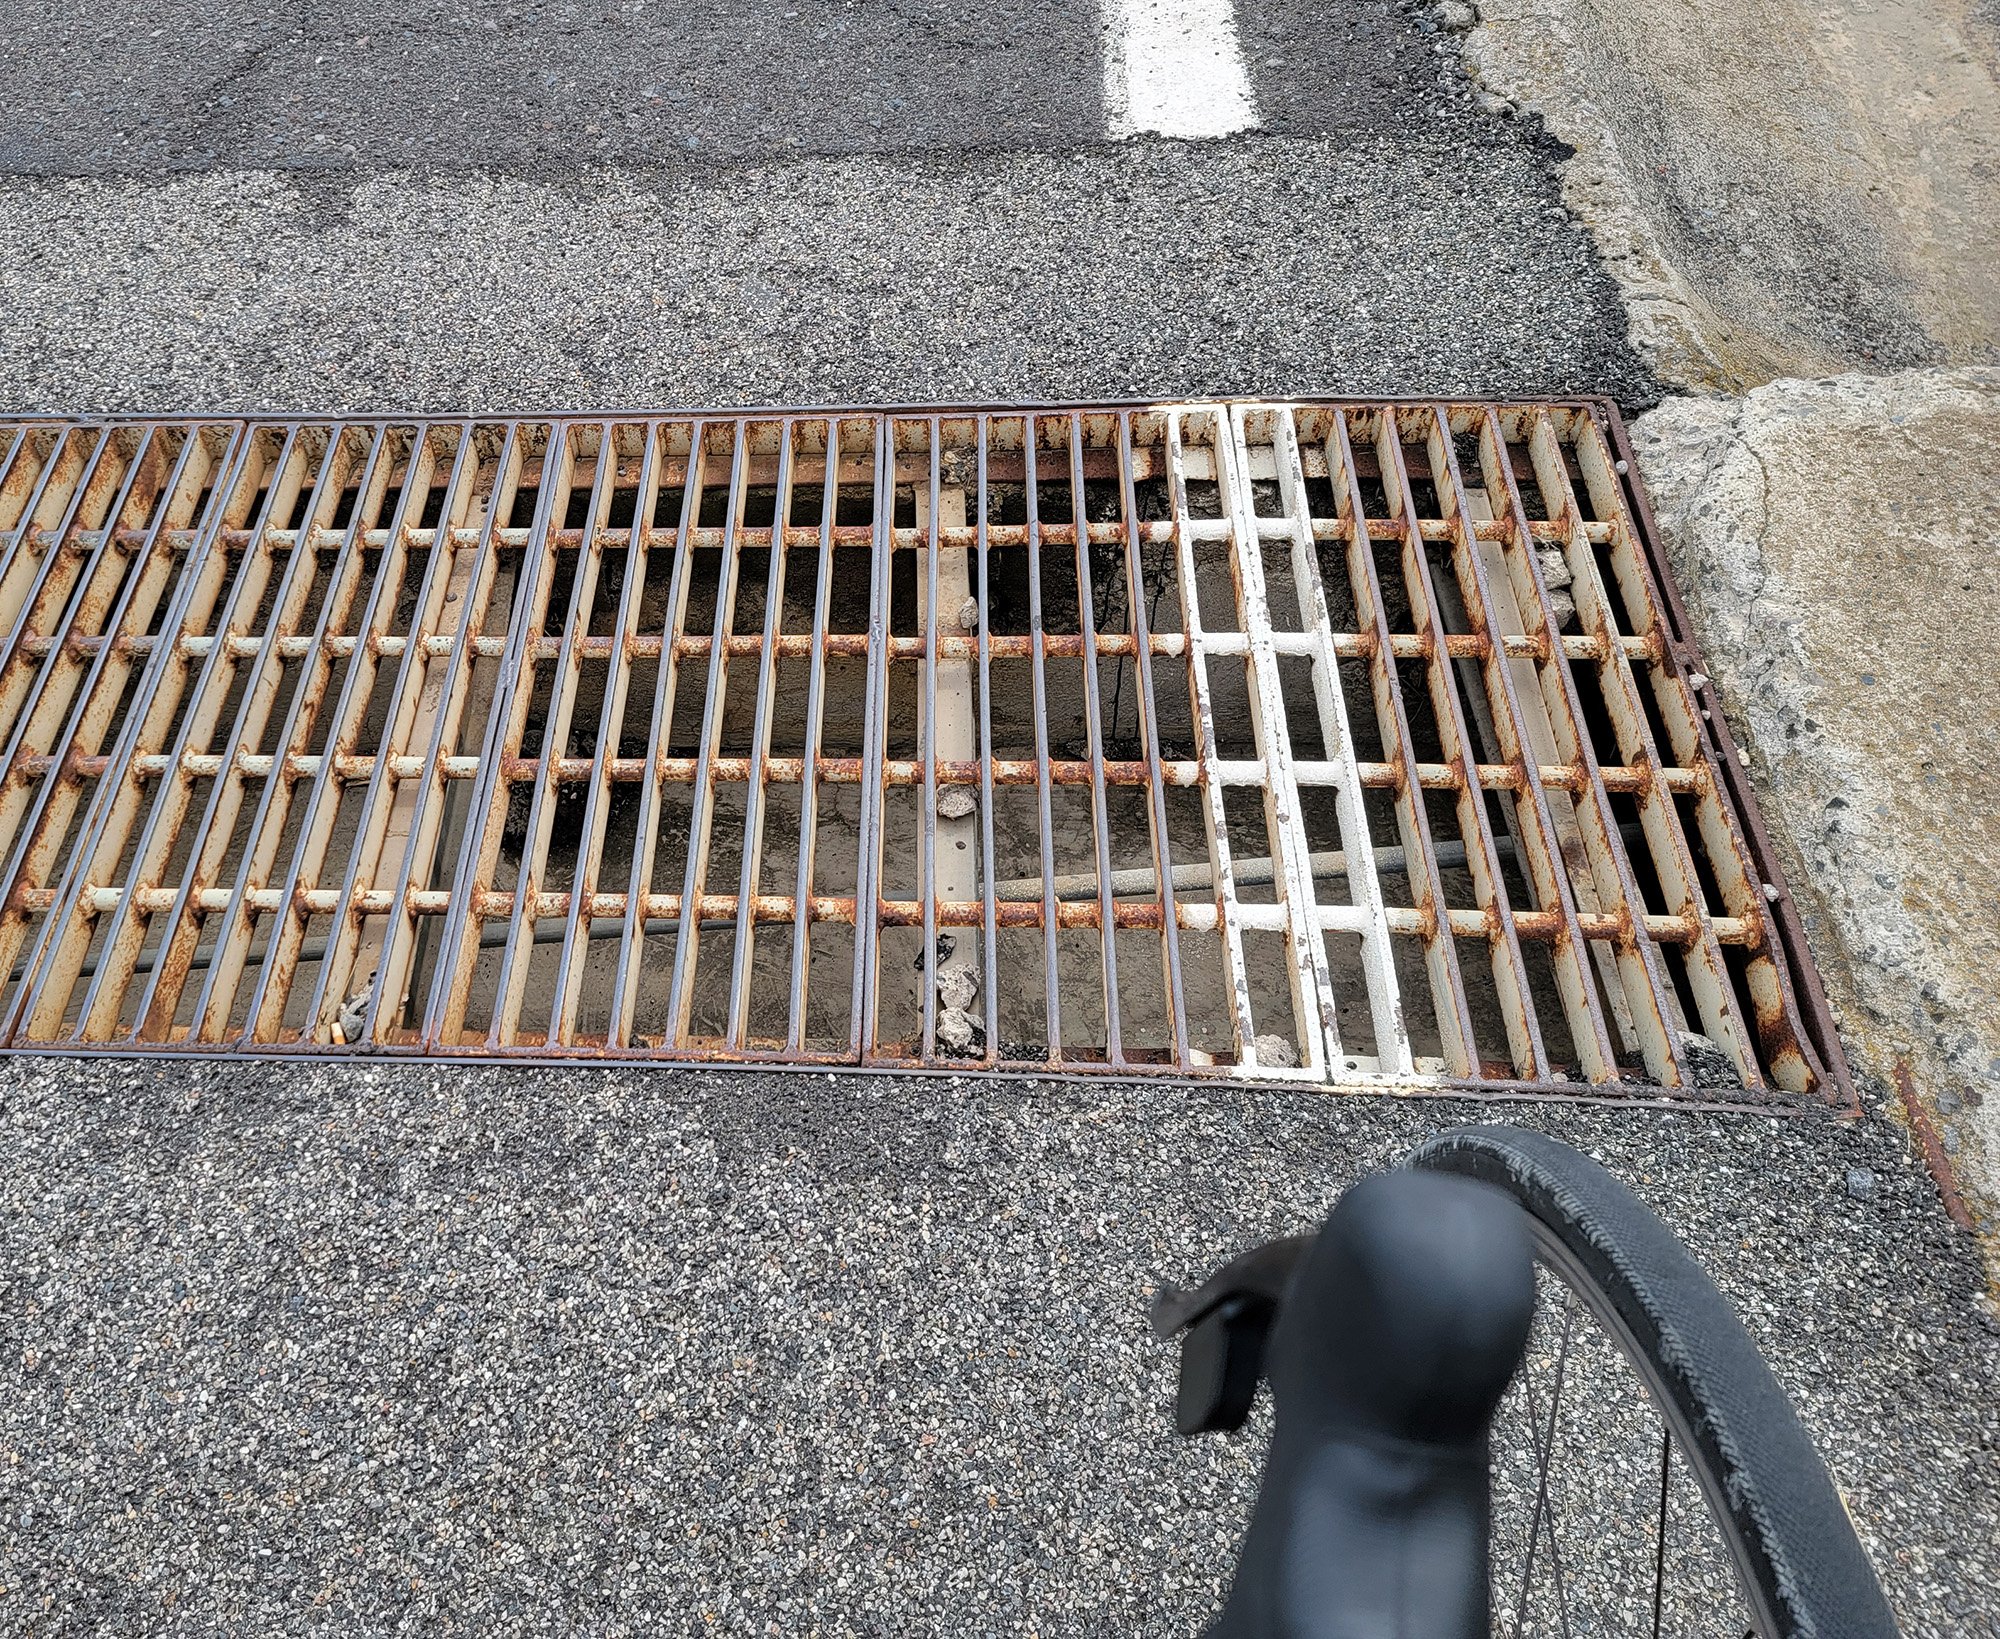 When you ride around some of the towns you'll notice the brain surgeons who designed the roads put these drainage grates in random places.